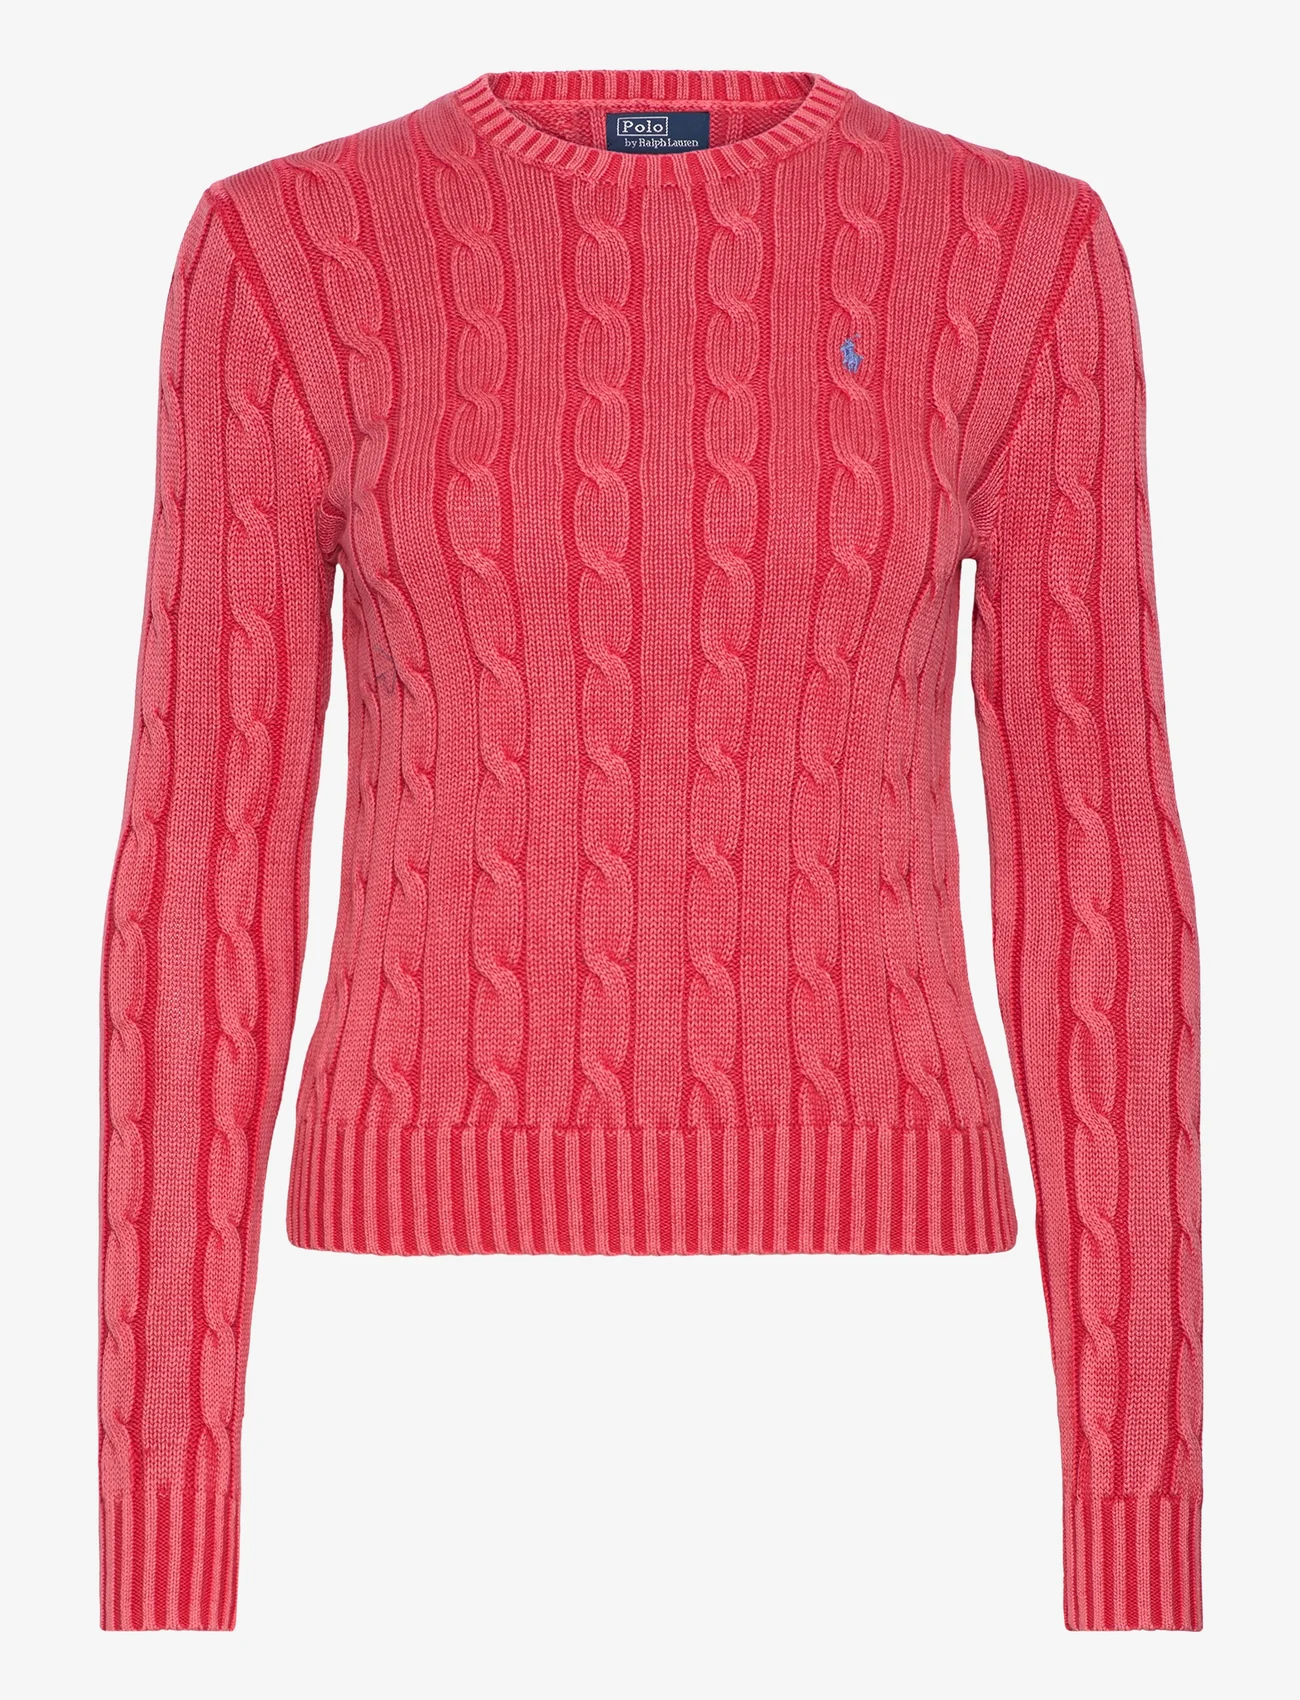 Polo Ralph Lauren - Cable-Knit Cotton Crewneck Sweater - swetry - corallo - 0